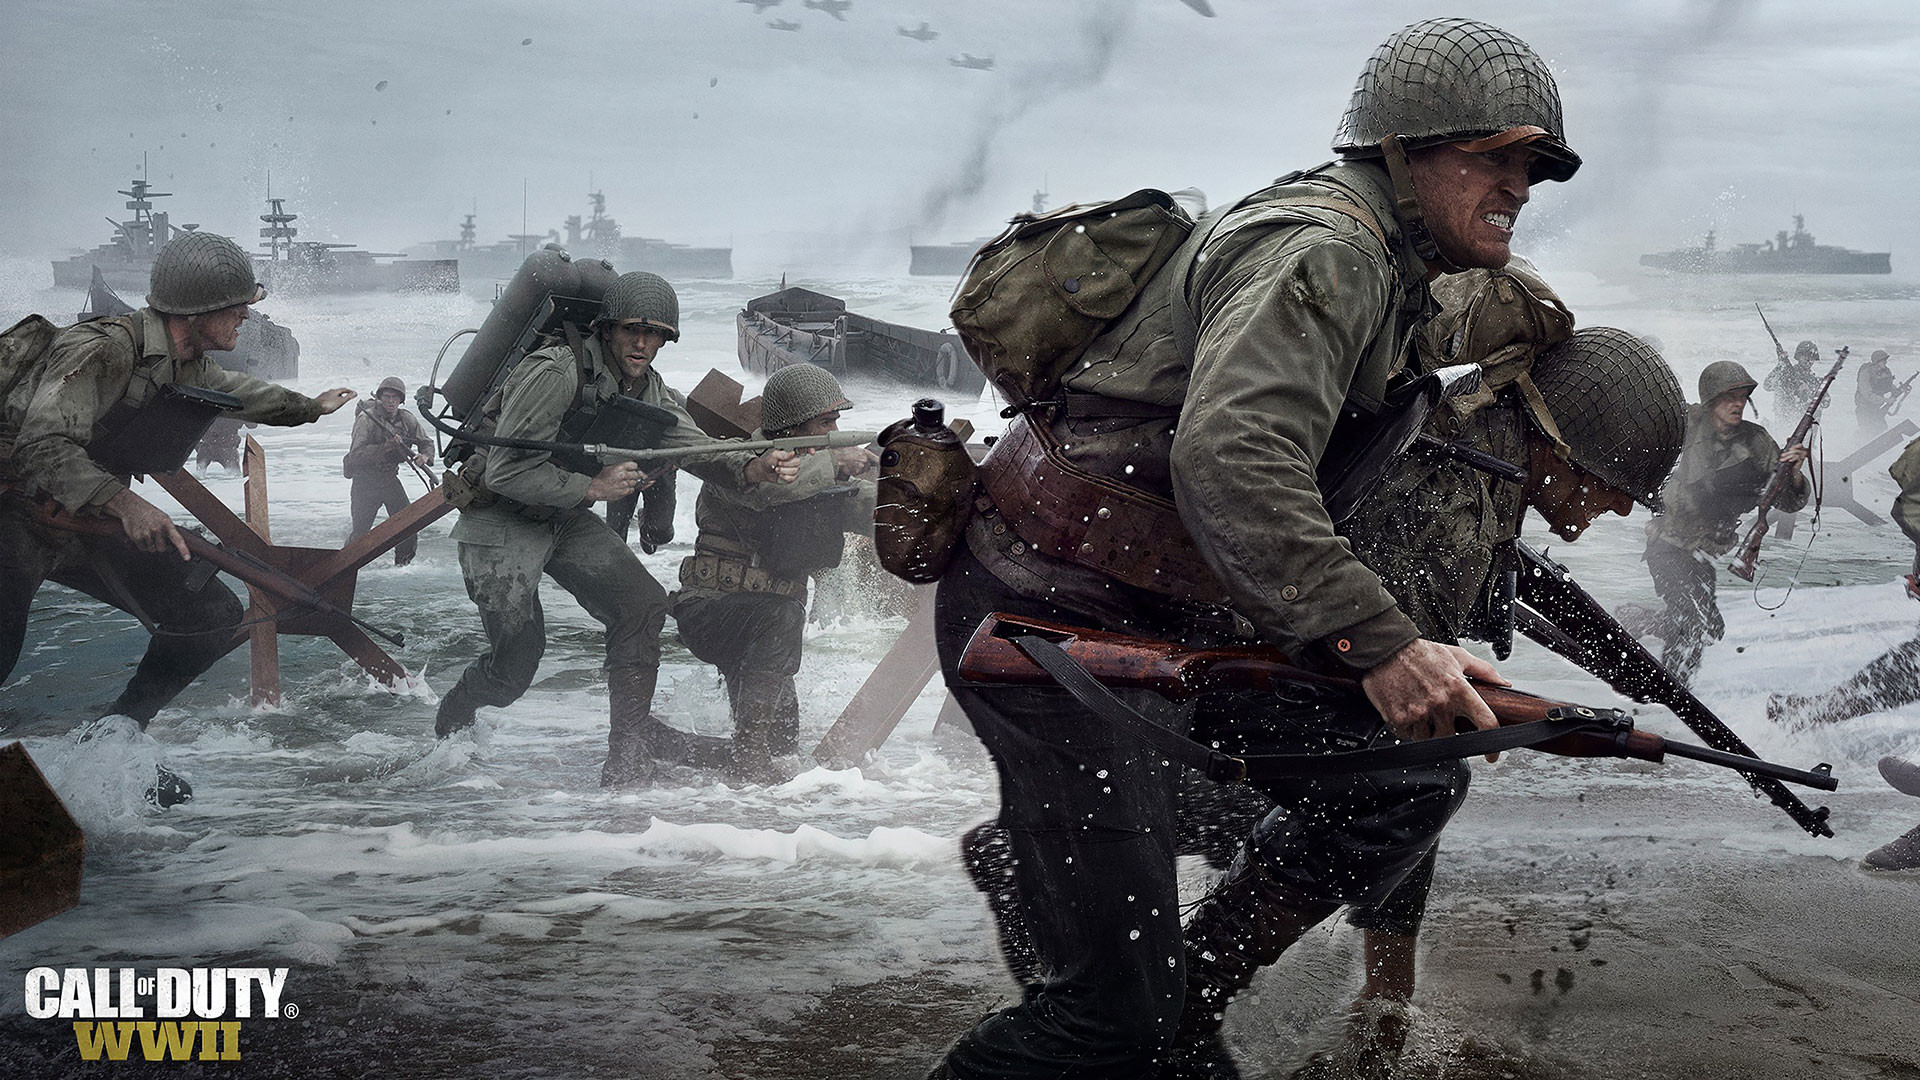 … CALL OF DUTY WWII 1080p Wallpaper …